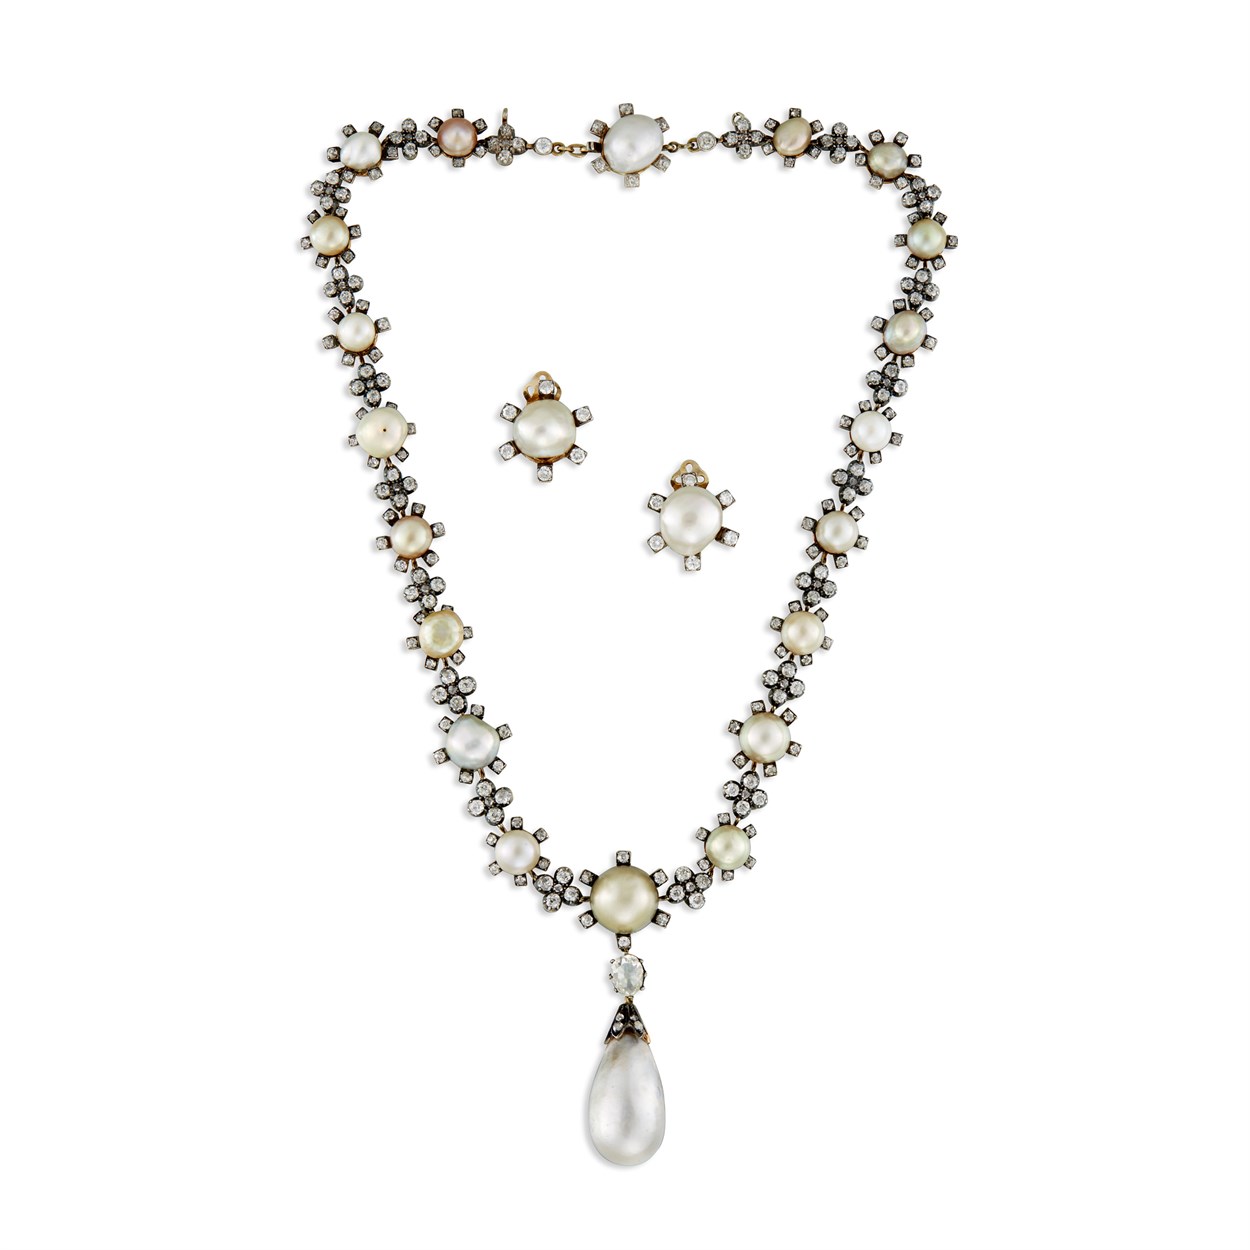 Lot 34 - Antique natural pearl, baroque pearl, and diamond necklace and earrings